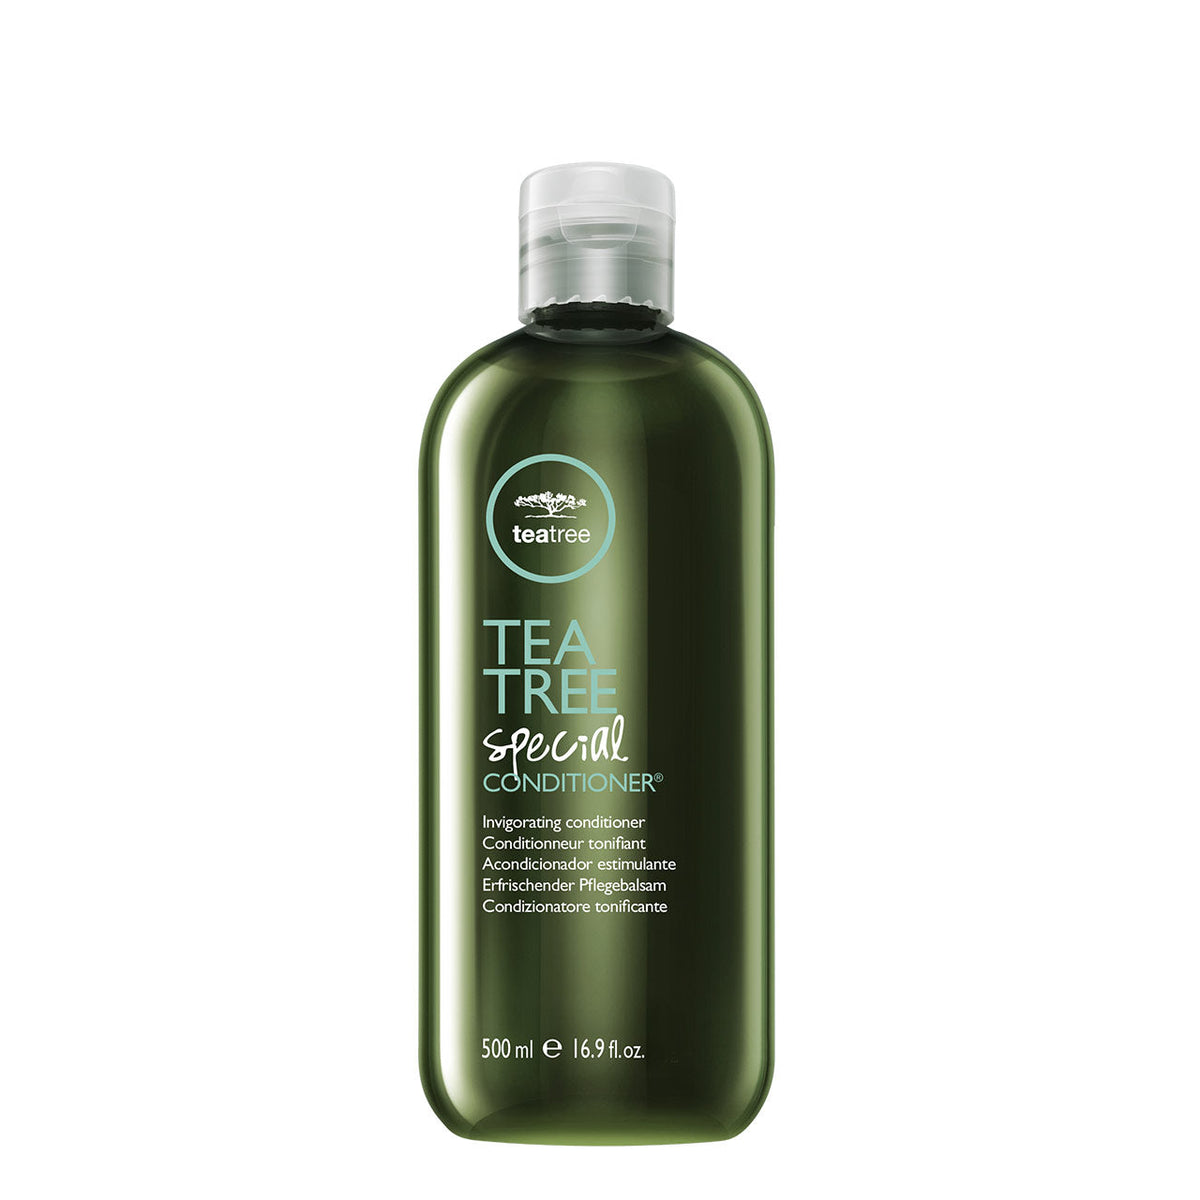 Tea Tree Special Conditioner - 500ML - by Paul Mitchell |ProCare Outlet|